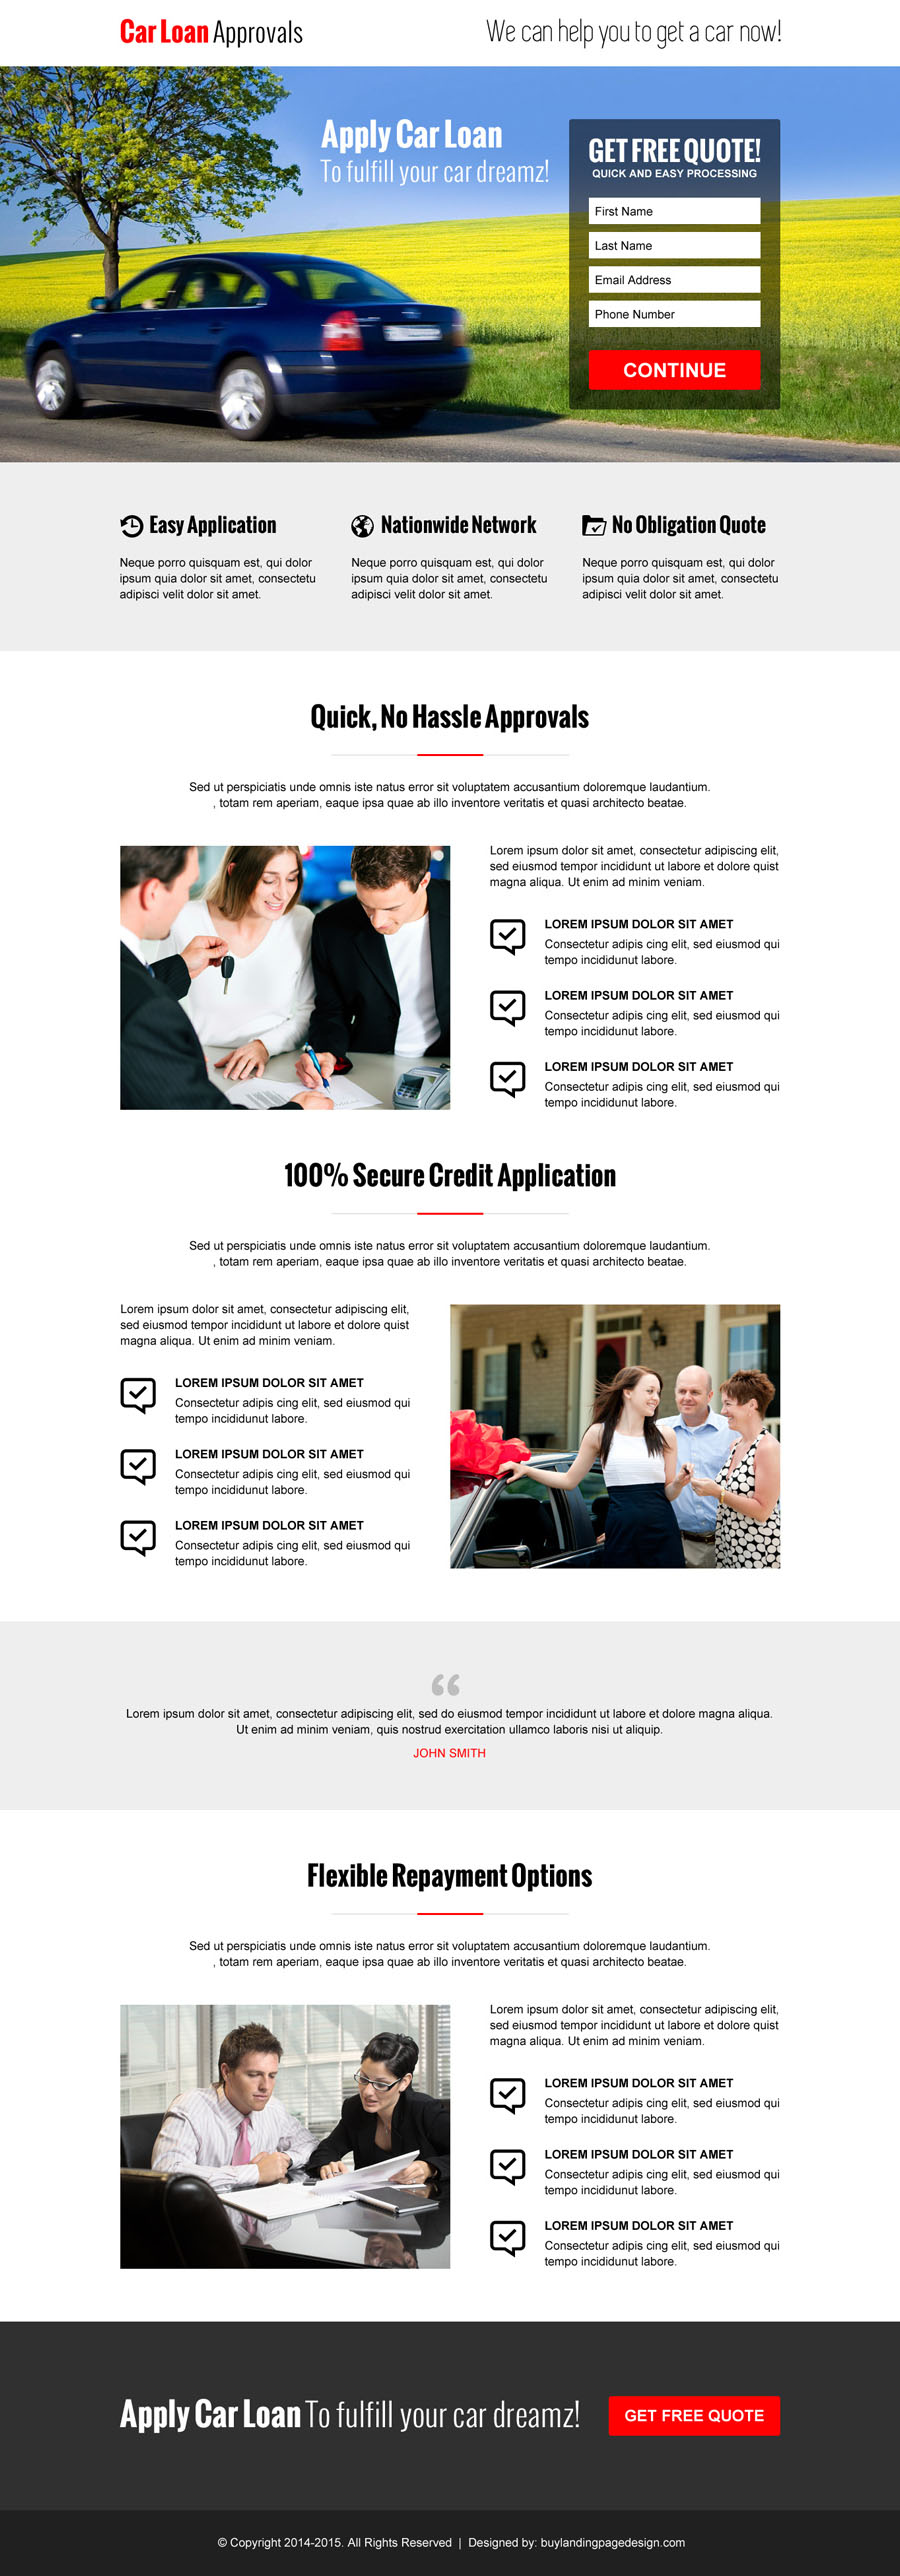 hassle-free-car-loan-approvals-lead-capture-converting-responsive-landing-page-design-template-003